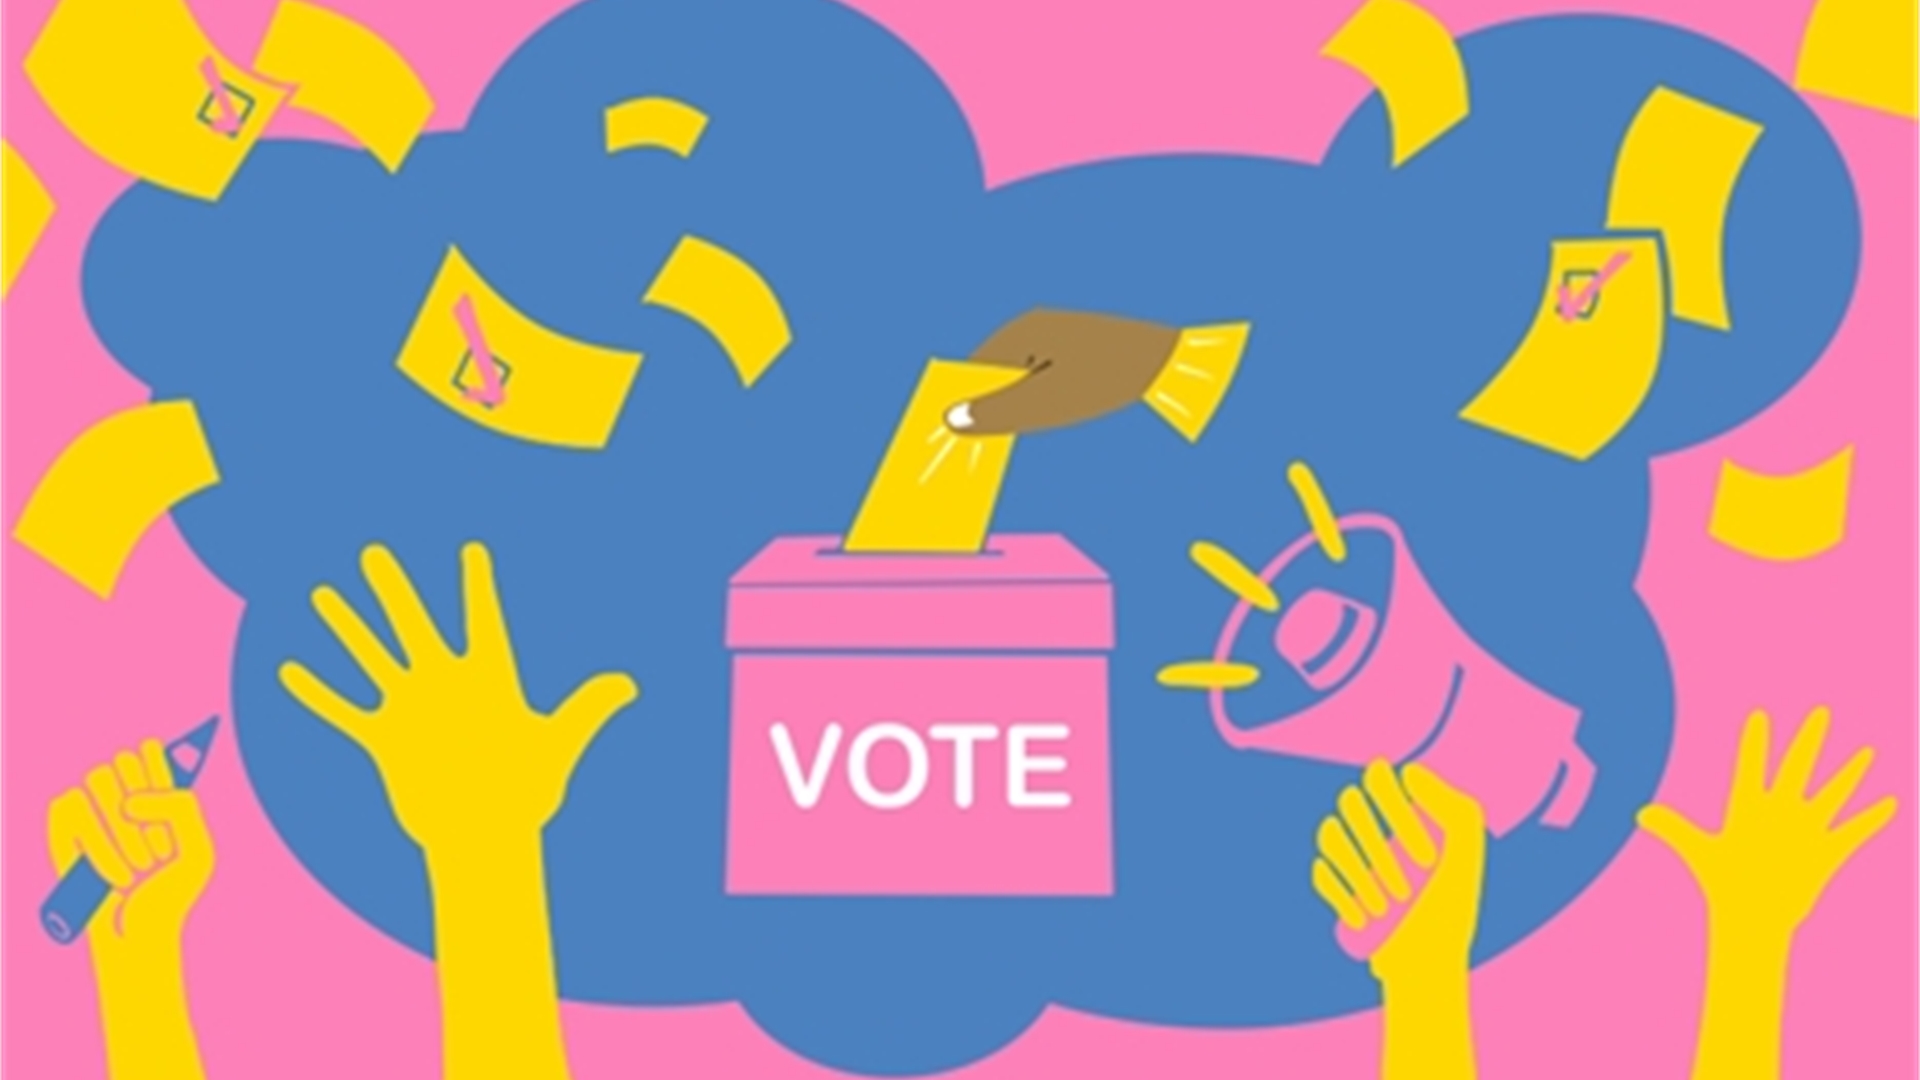 An illustration showing a voting box with megaphones and voter ballots floating around it